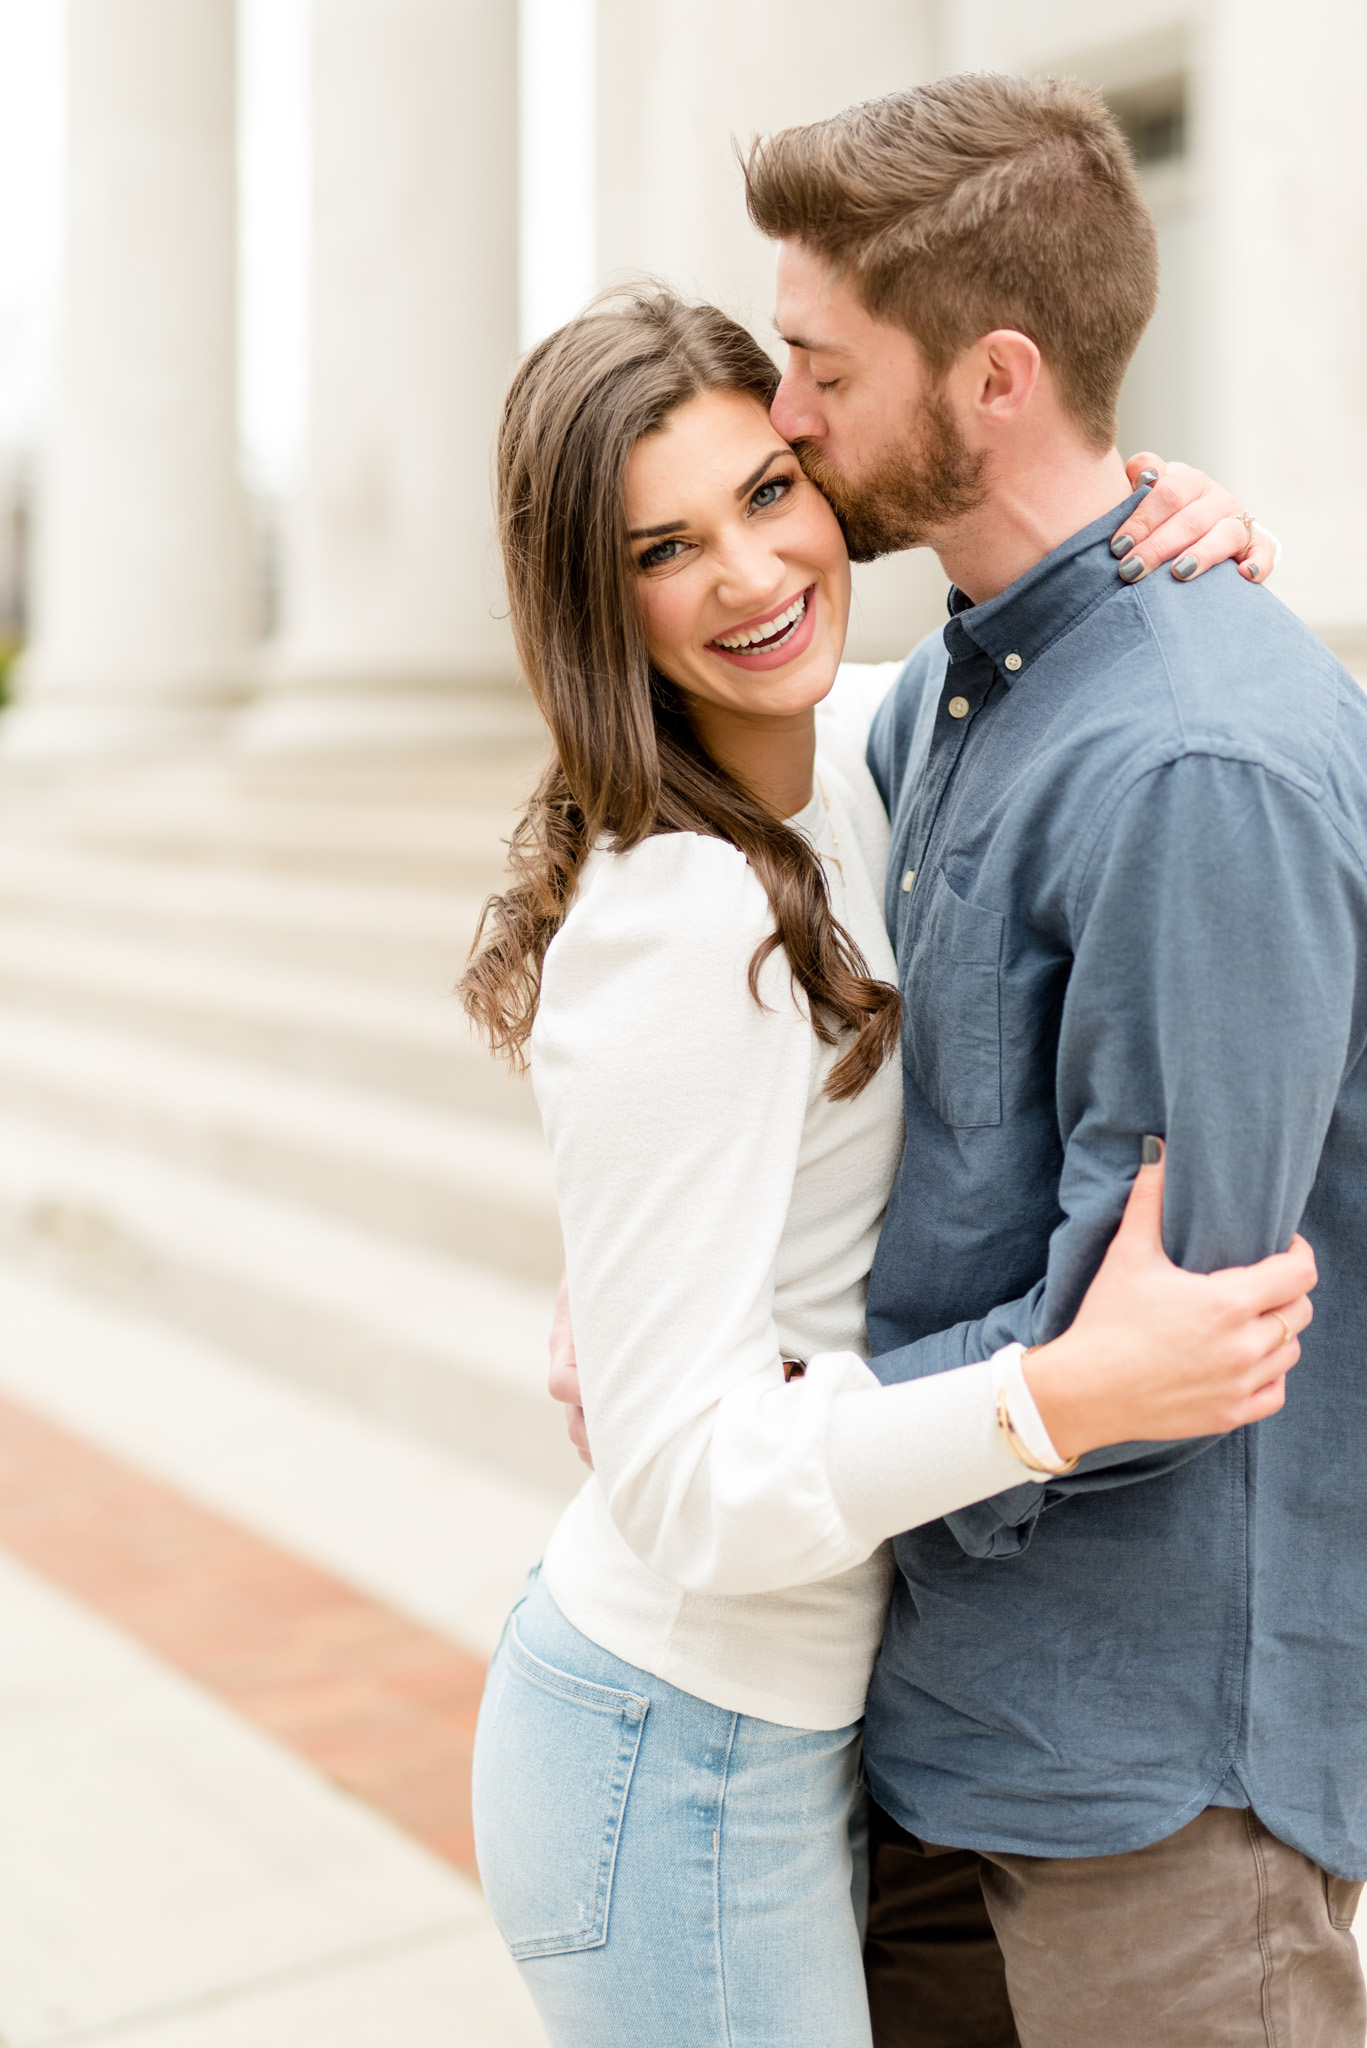 Woman smiles at camera while fiancÃ© kisses her head.